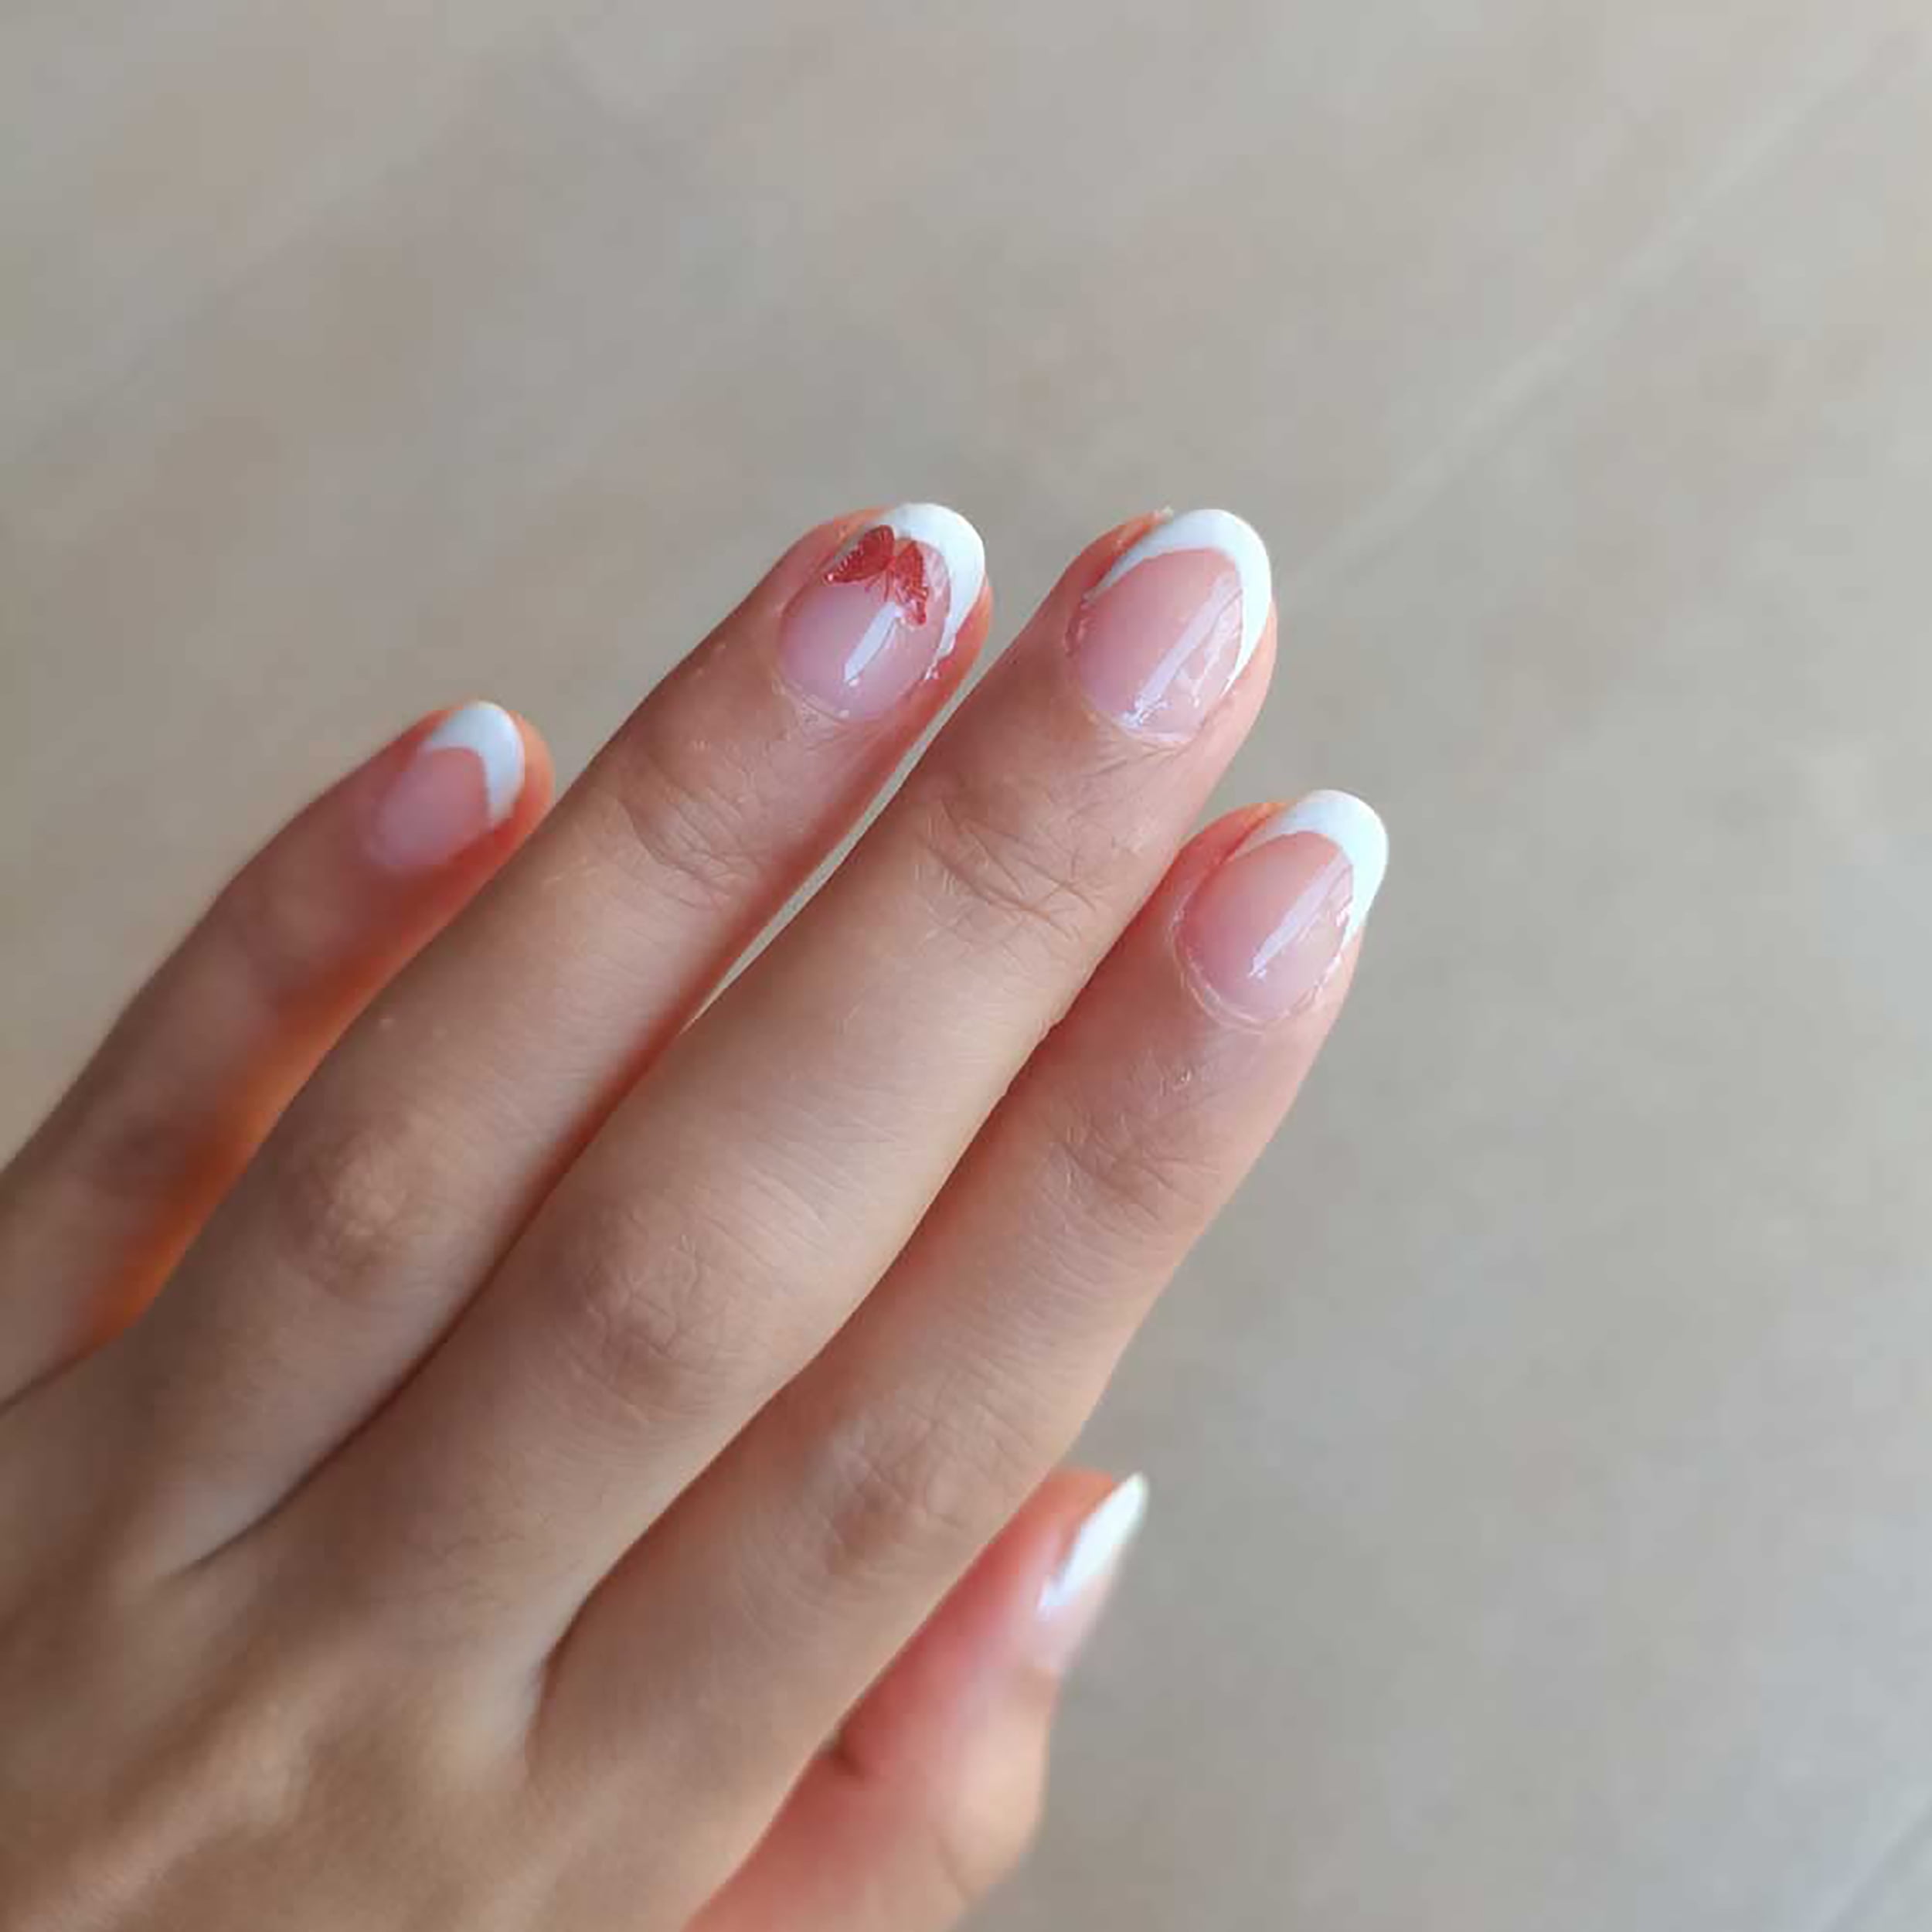 Winter UV Gel Nails: Stay Trendy and Season-Ready with These Nail Art